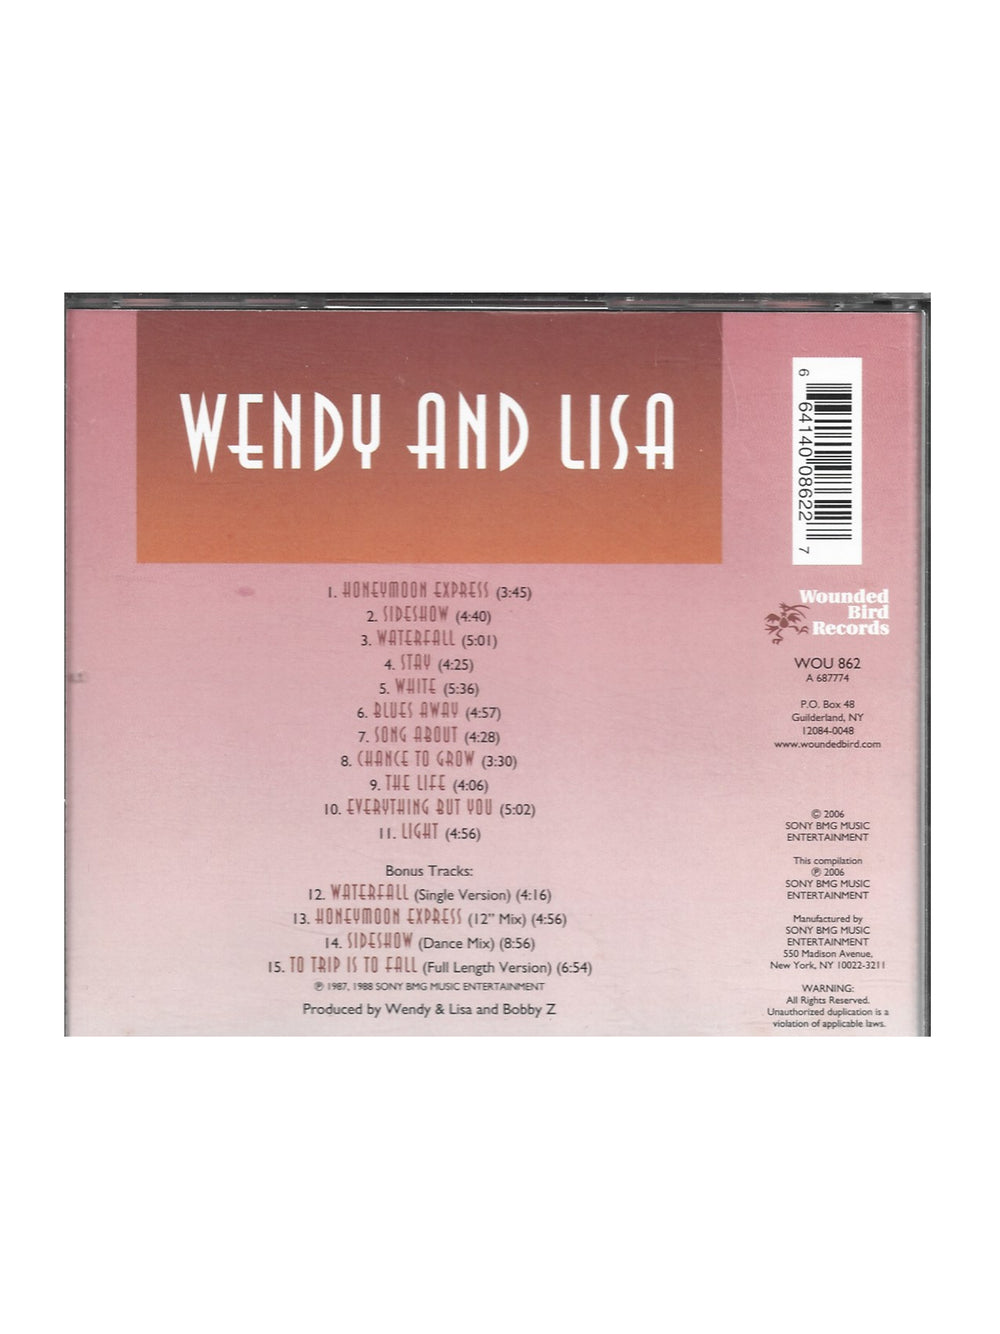 Prince – Wendy & Lisa Self Titled CD Album Reissue US Diff Cover ADD 4 Tracks Preloved: 2006